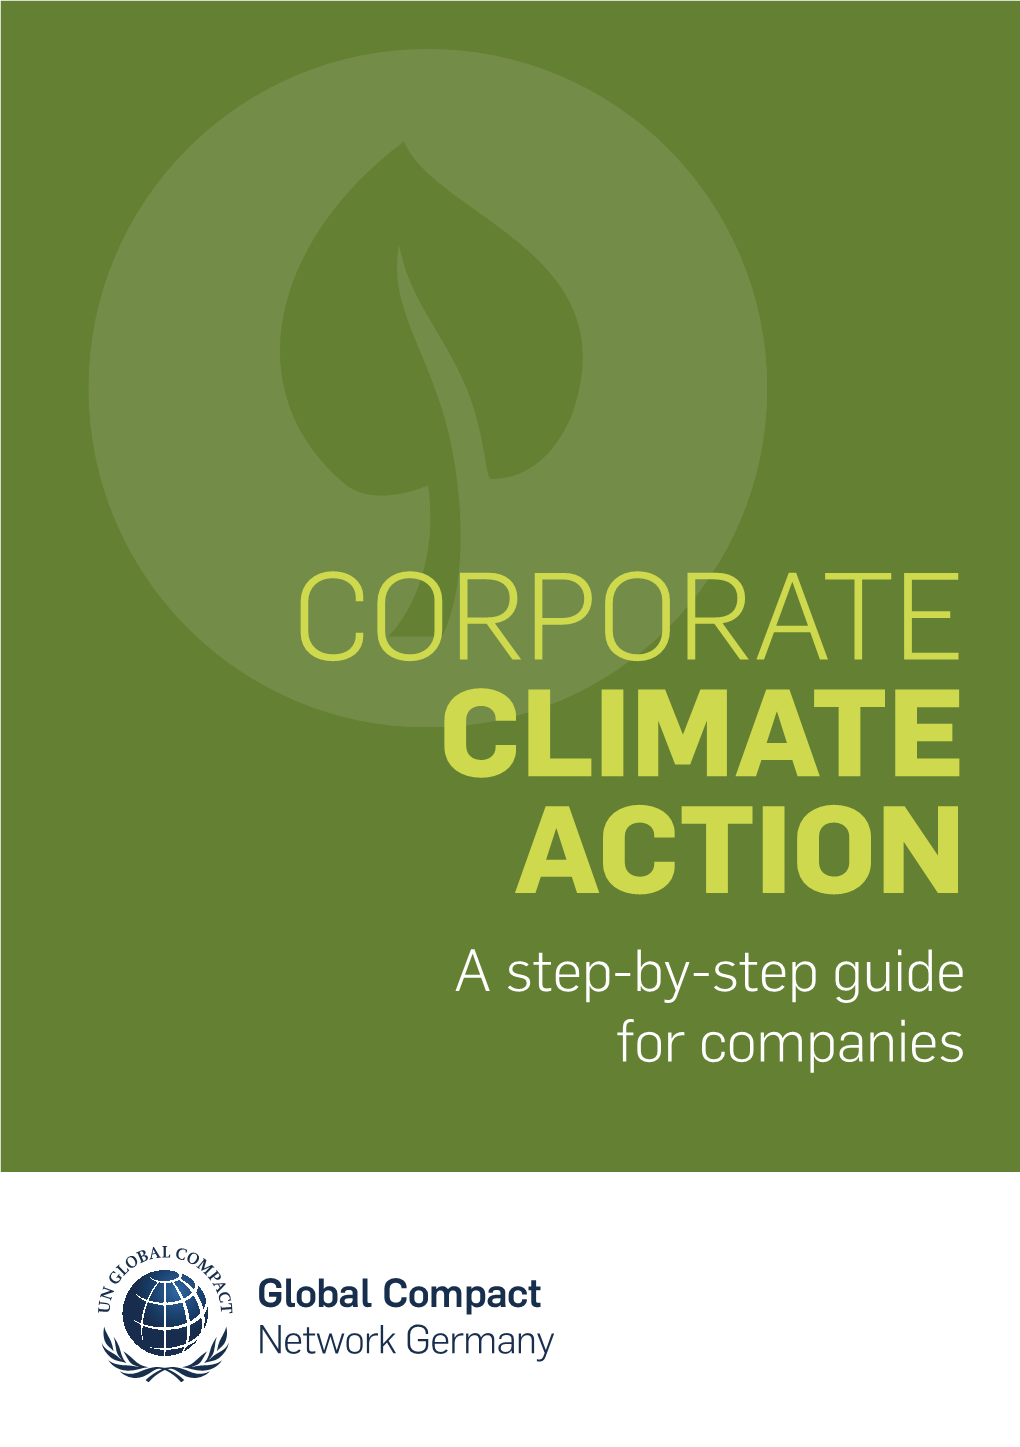 CORPORATE CLIMATE ACTION a Step-By-Step Guide for Companies